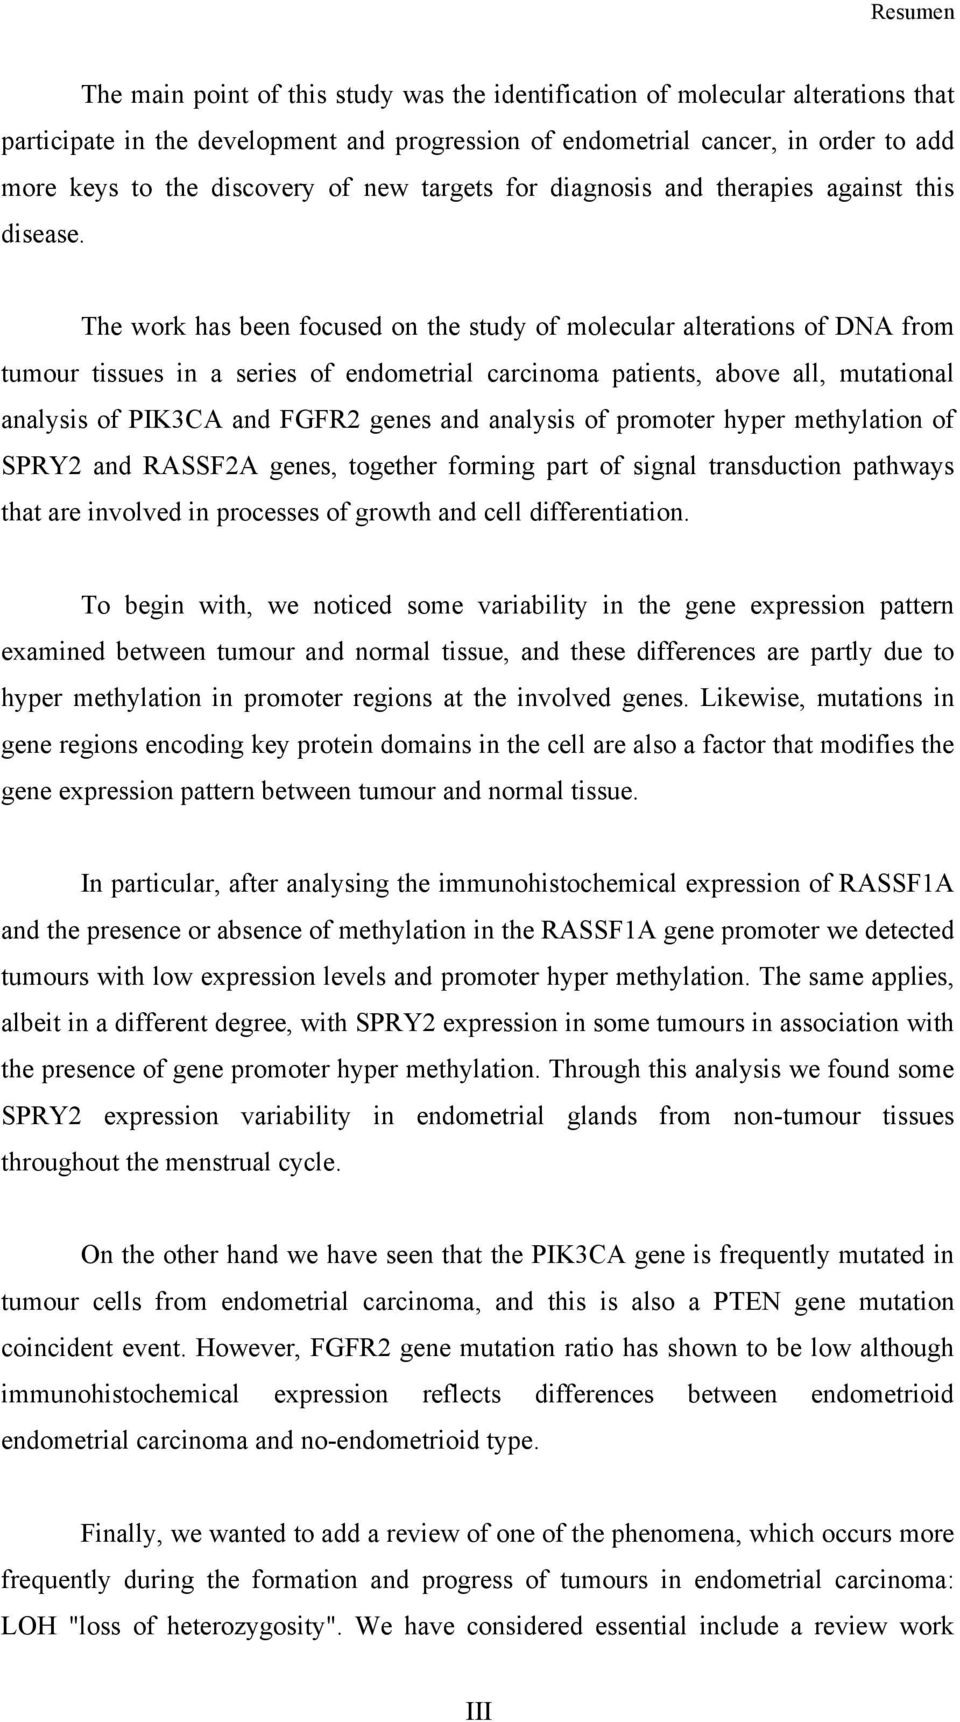 The work has been focused on the study of molecular alterations of DNA from tumour tissues in a series of endometrial carcinoma patients, above all, mutational analysis of PIK3CA and FGFR2 genes and